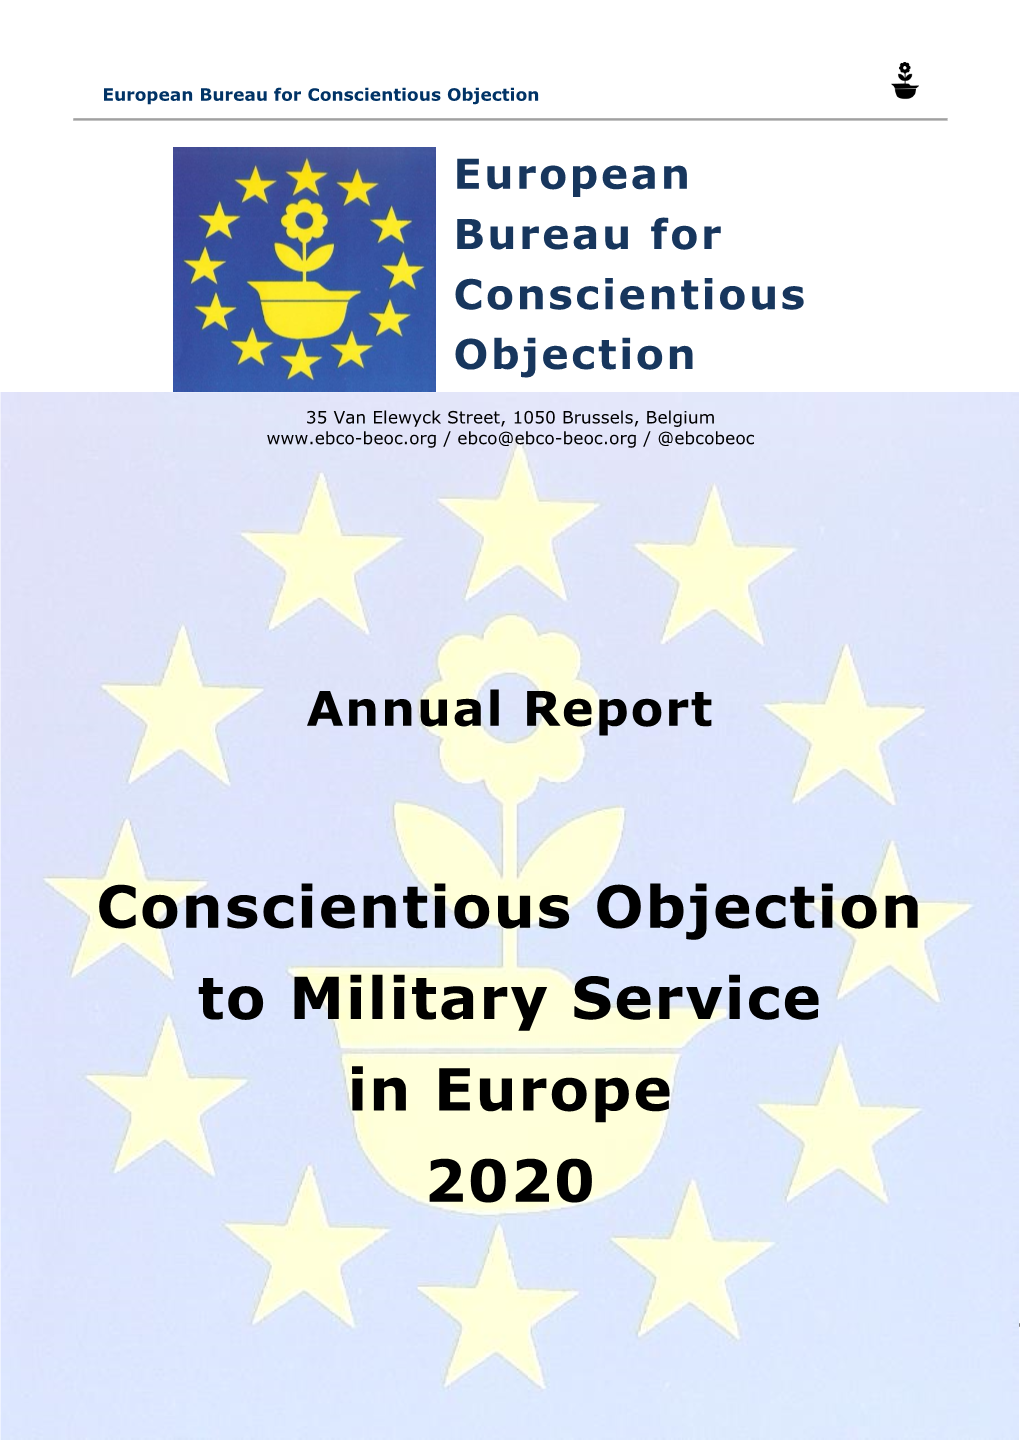 Conscientious Objection to Military Service in Europe 2020